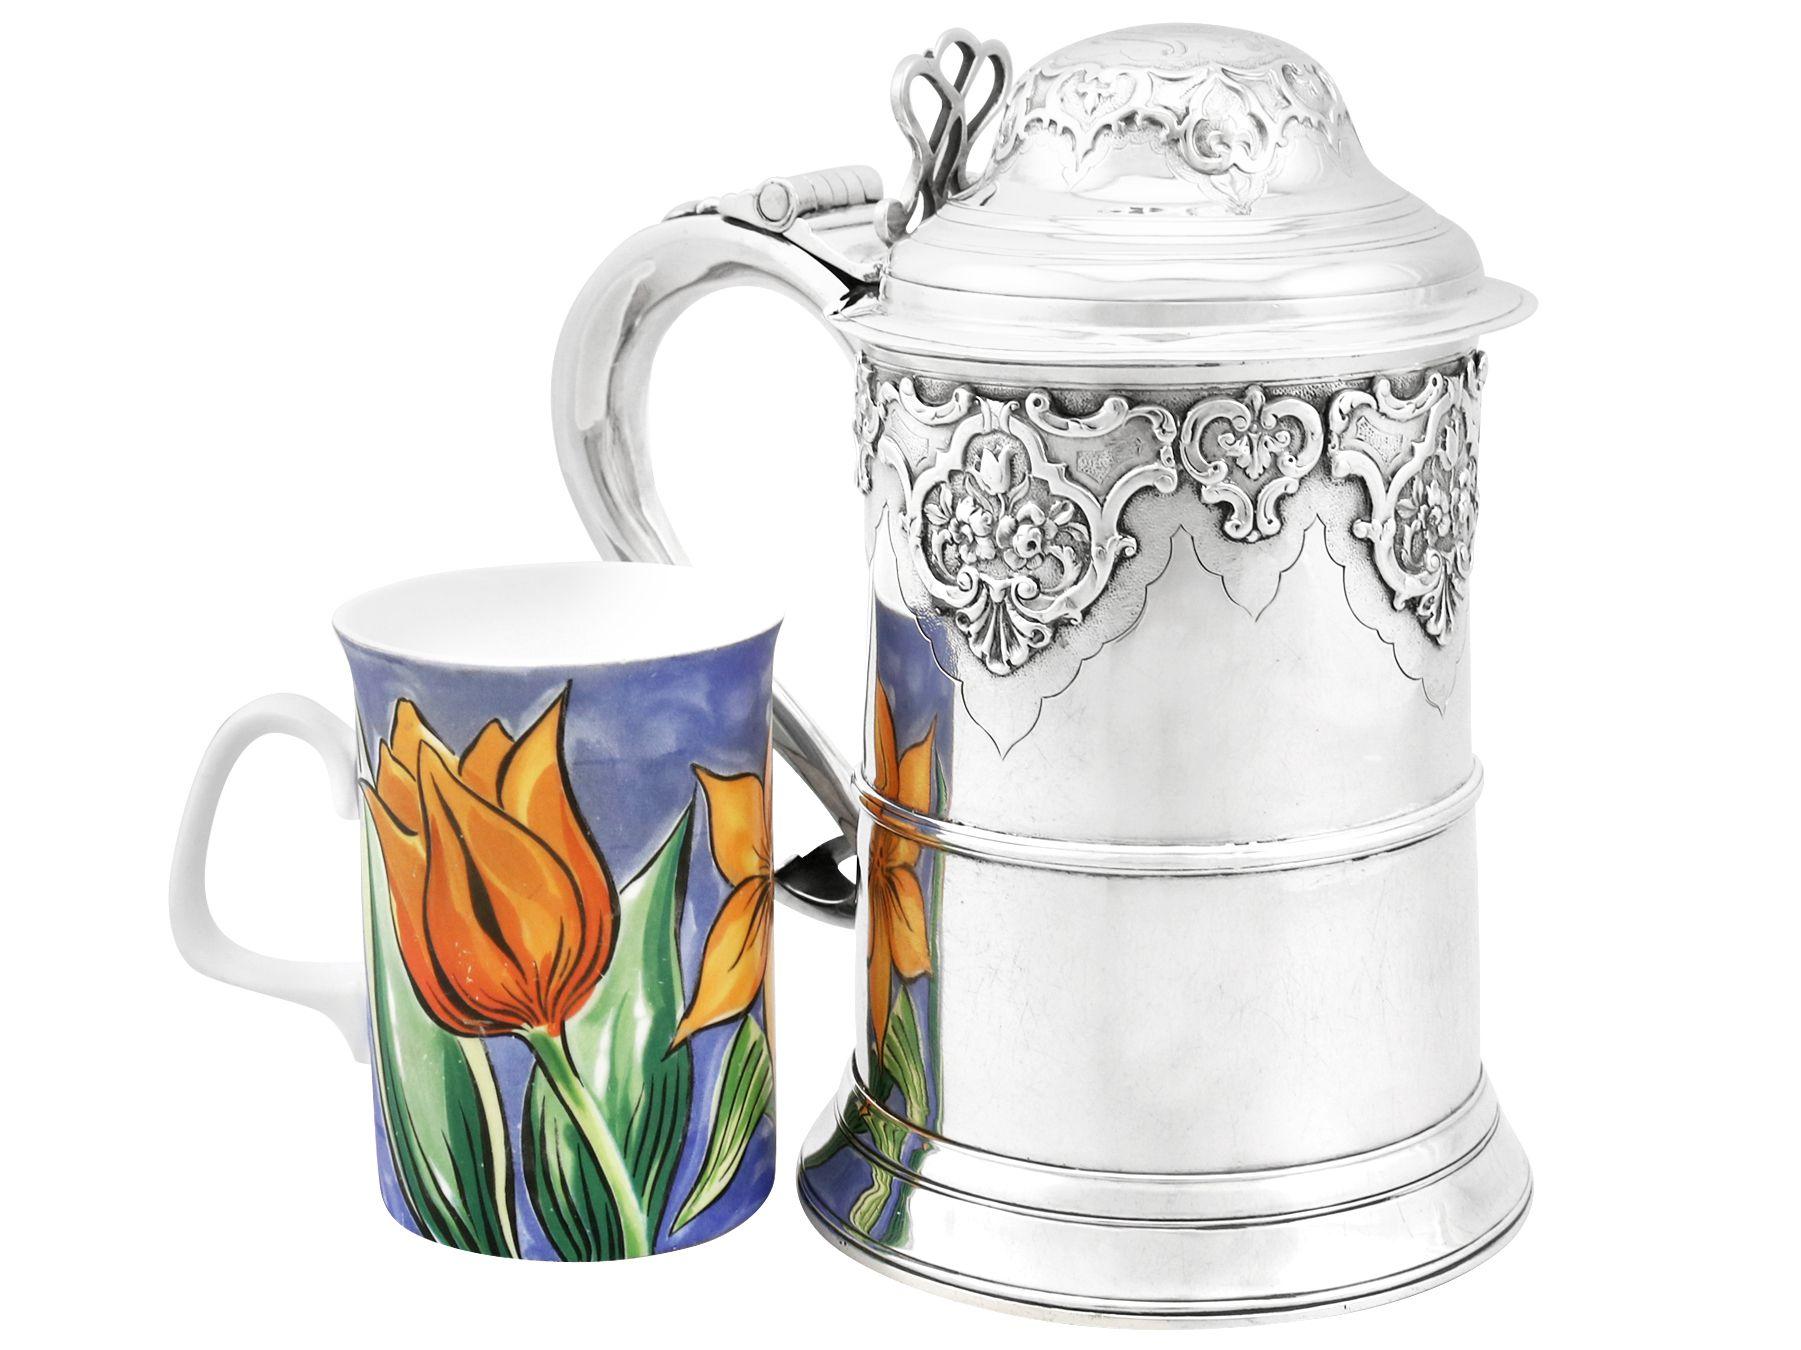 An exceptional, fine and impressive antique Georgian Newcastle sterling silver quart tankard made by Dorothy Langlands, an addition to our silver tankard collection.

This exceptional antique Georgian sterling silver quart tankard has a plain